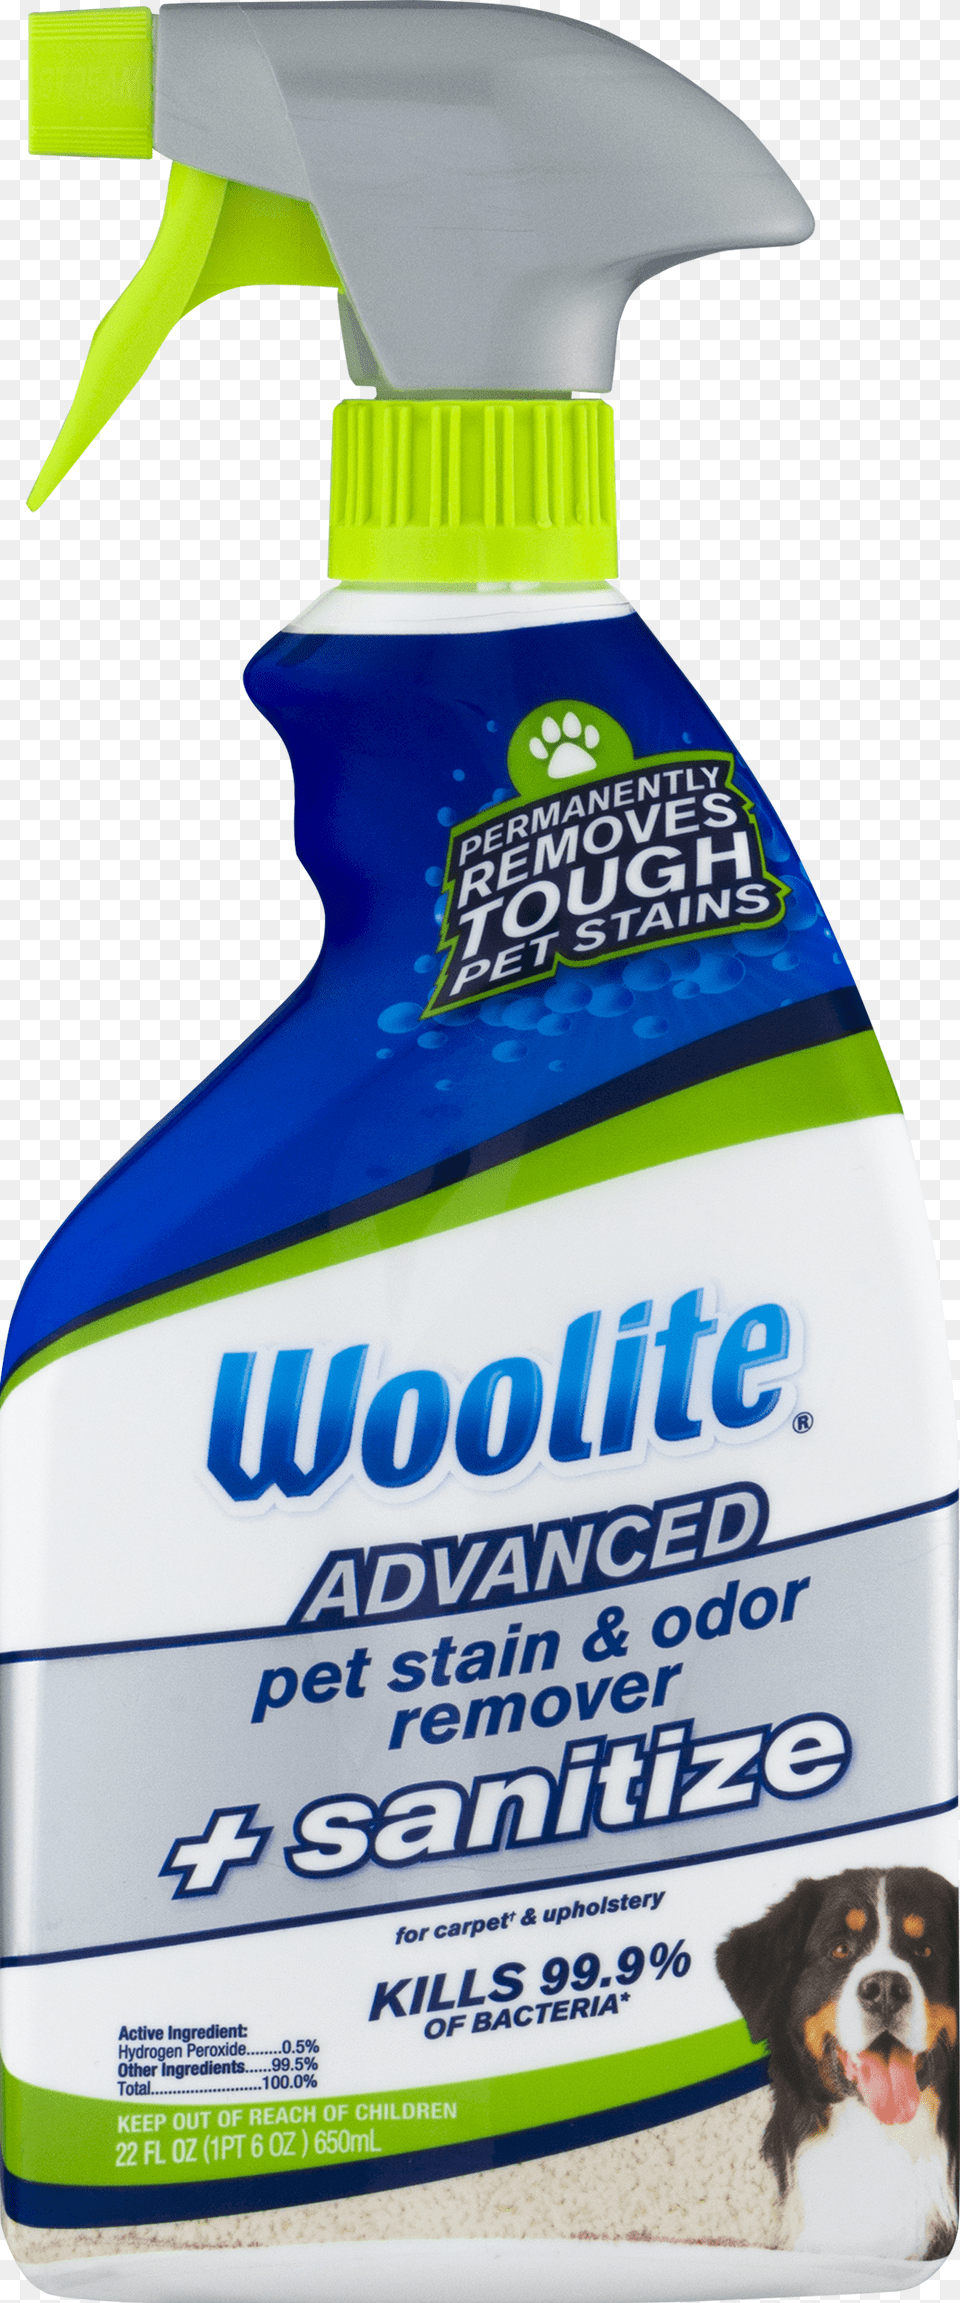 Woolite Advanced Pet Stain Amp Odor Remover Sanitize Bissell Woolite Advanced Pet Stain Amp Odor Remover, Animal, Bottle, Canine, Dog Png